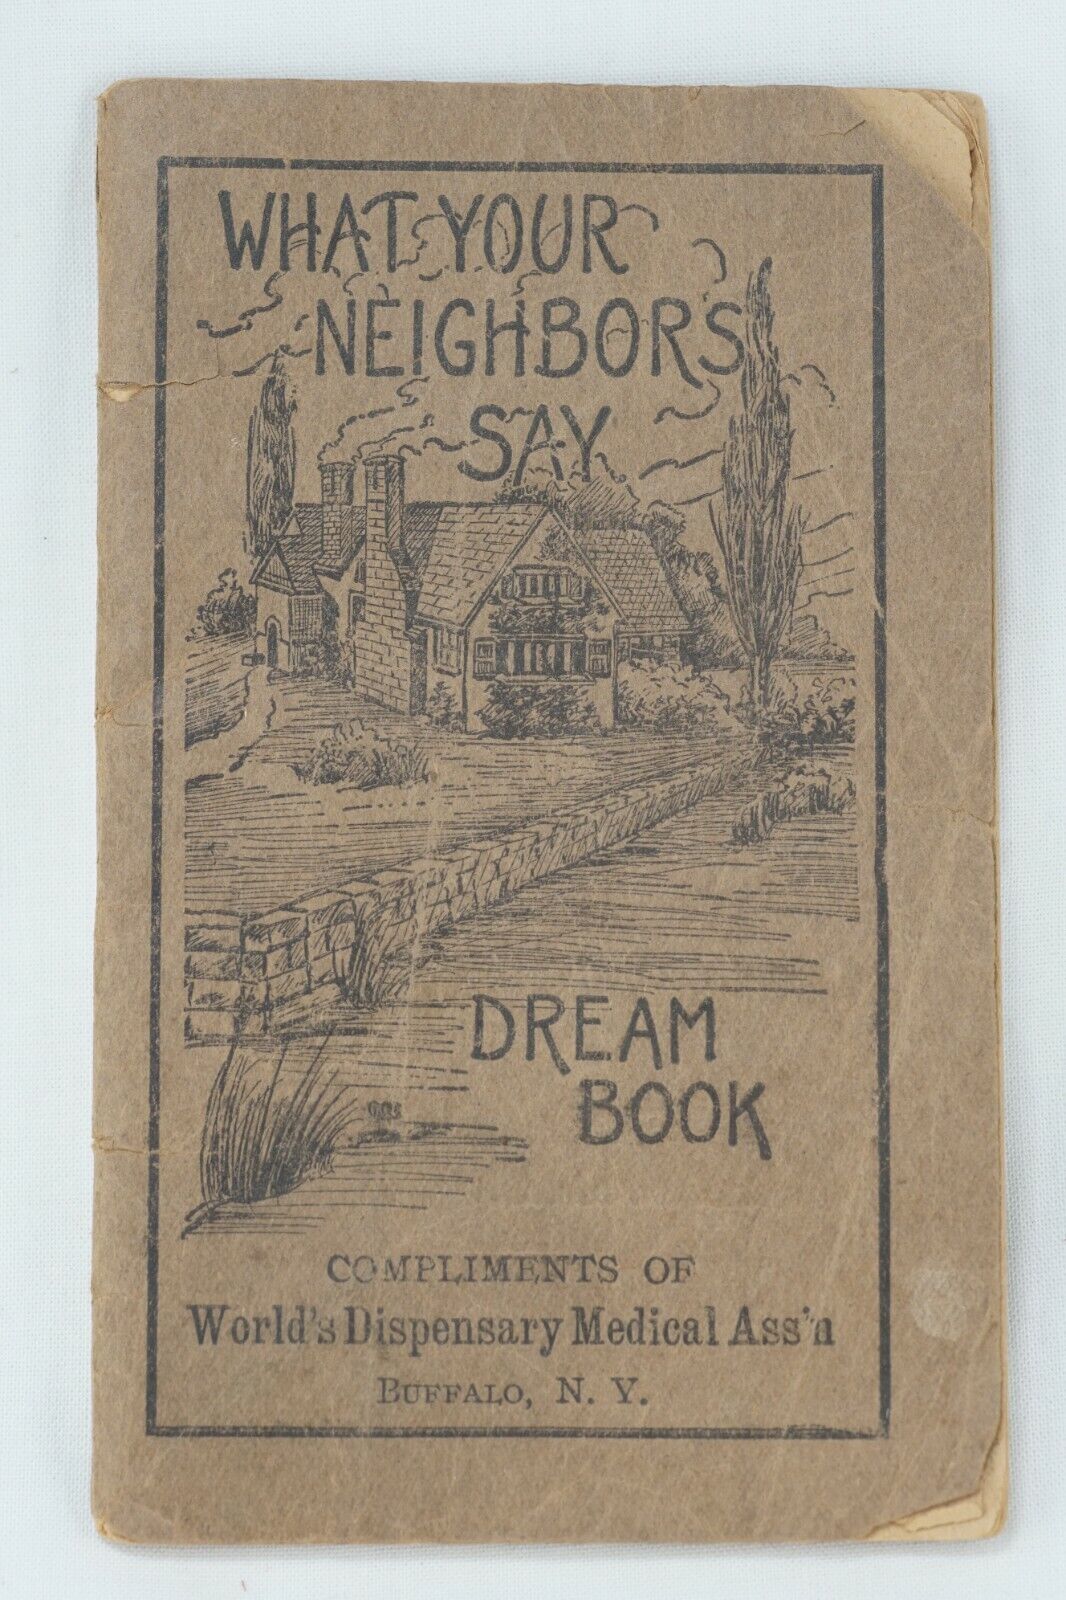 Antique World's Dispensary Medical Ass'n, What Your Neighbors Say, Dream Book